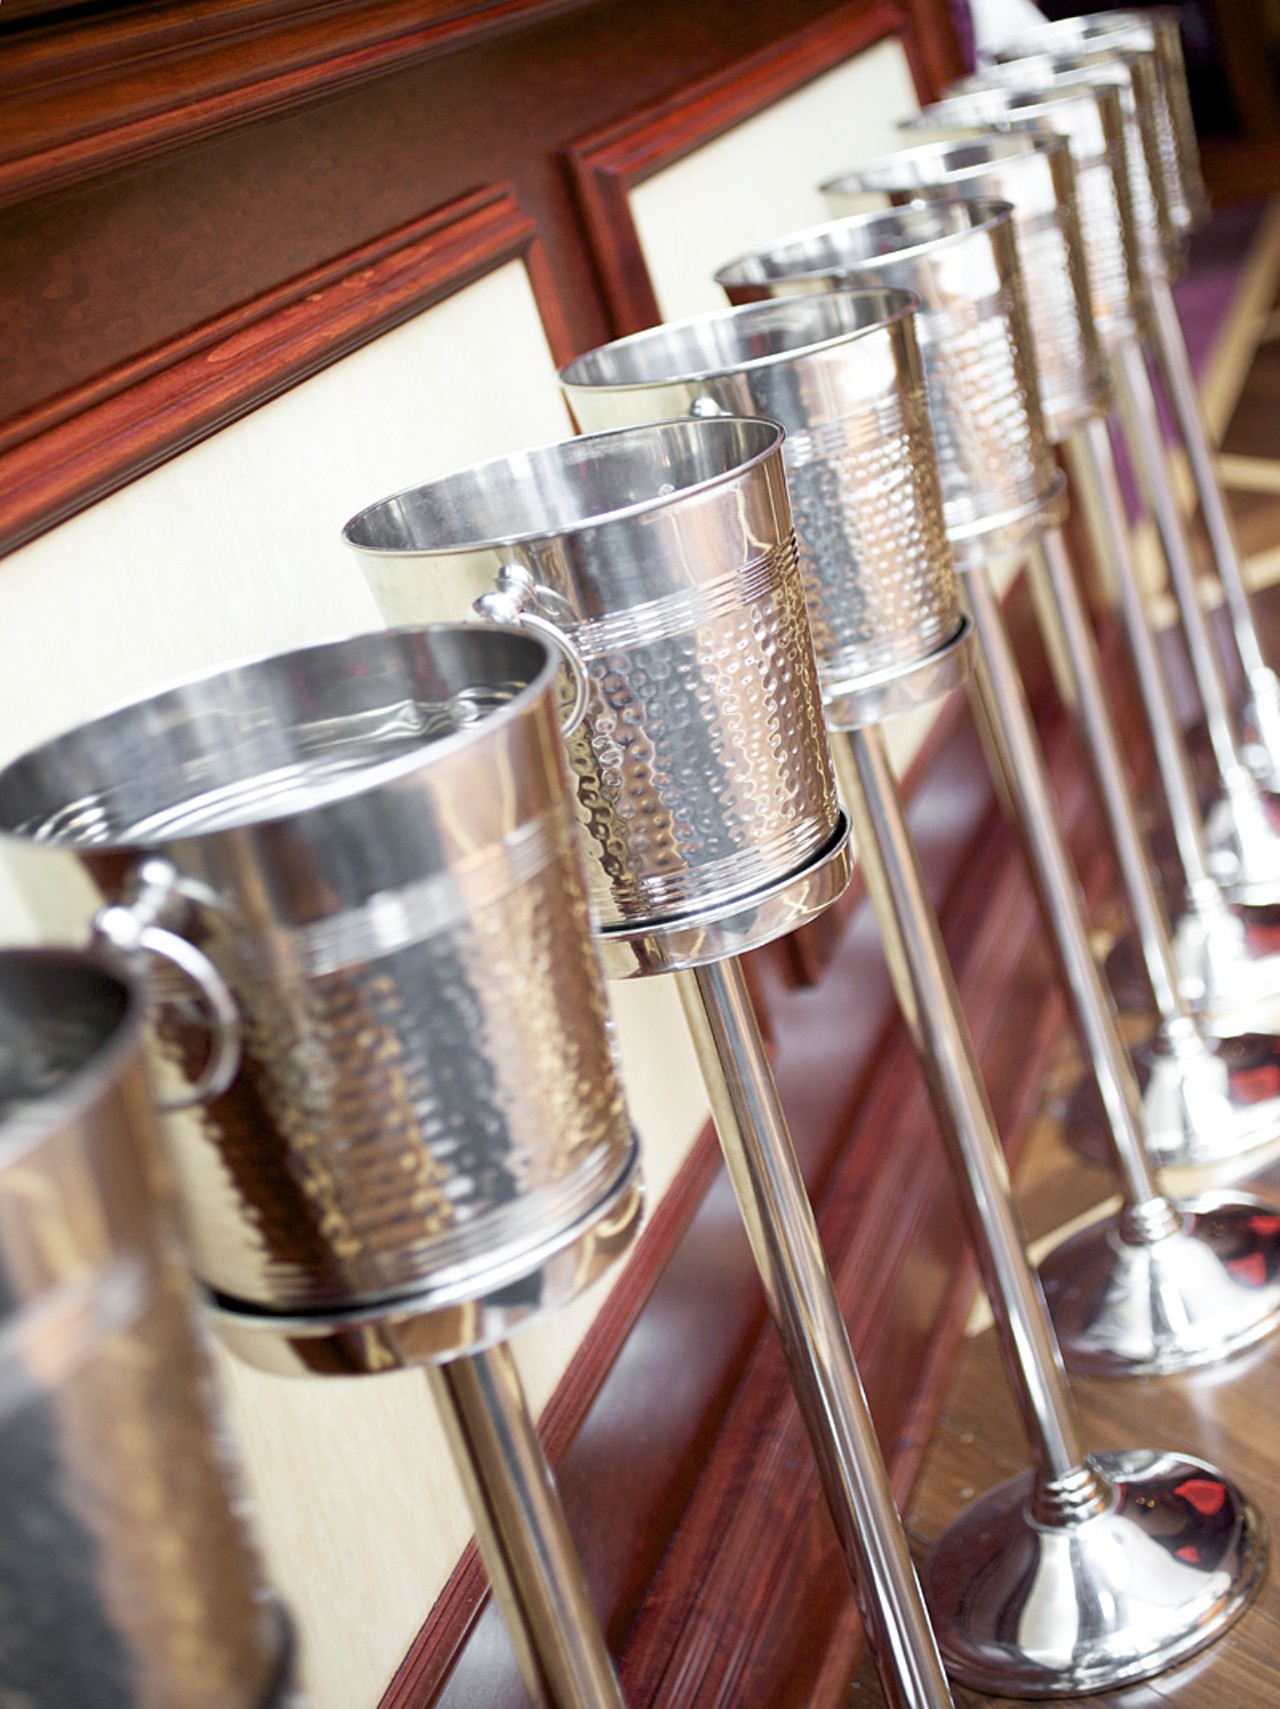 The champagne buckets await your order.